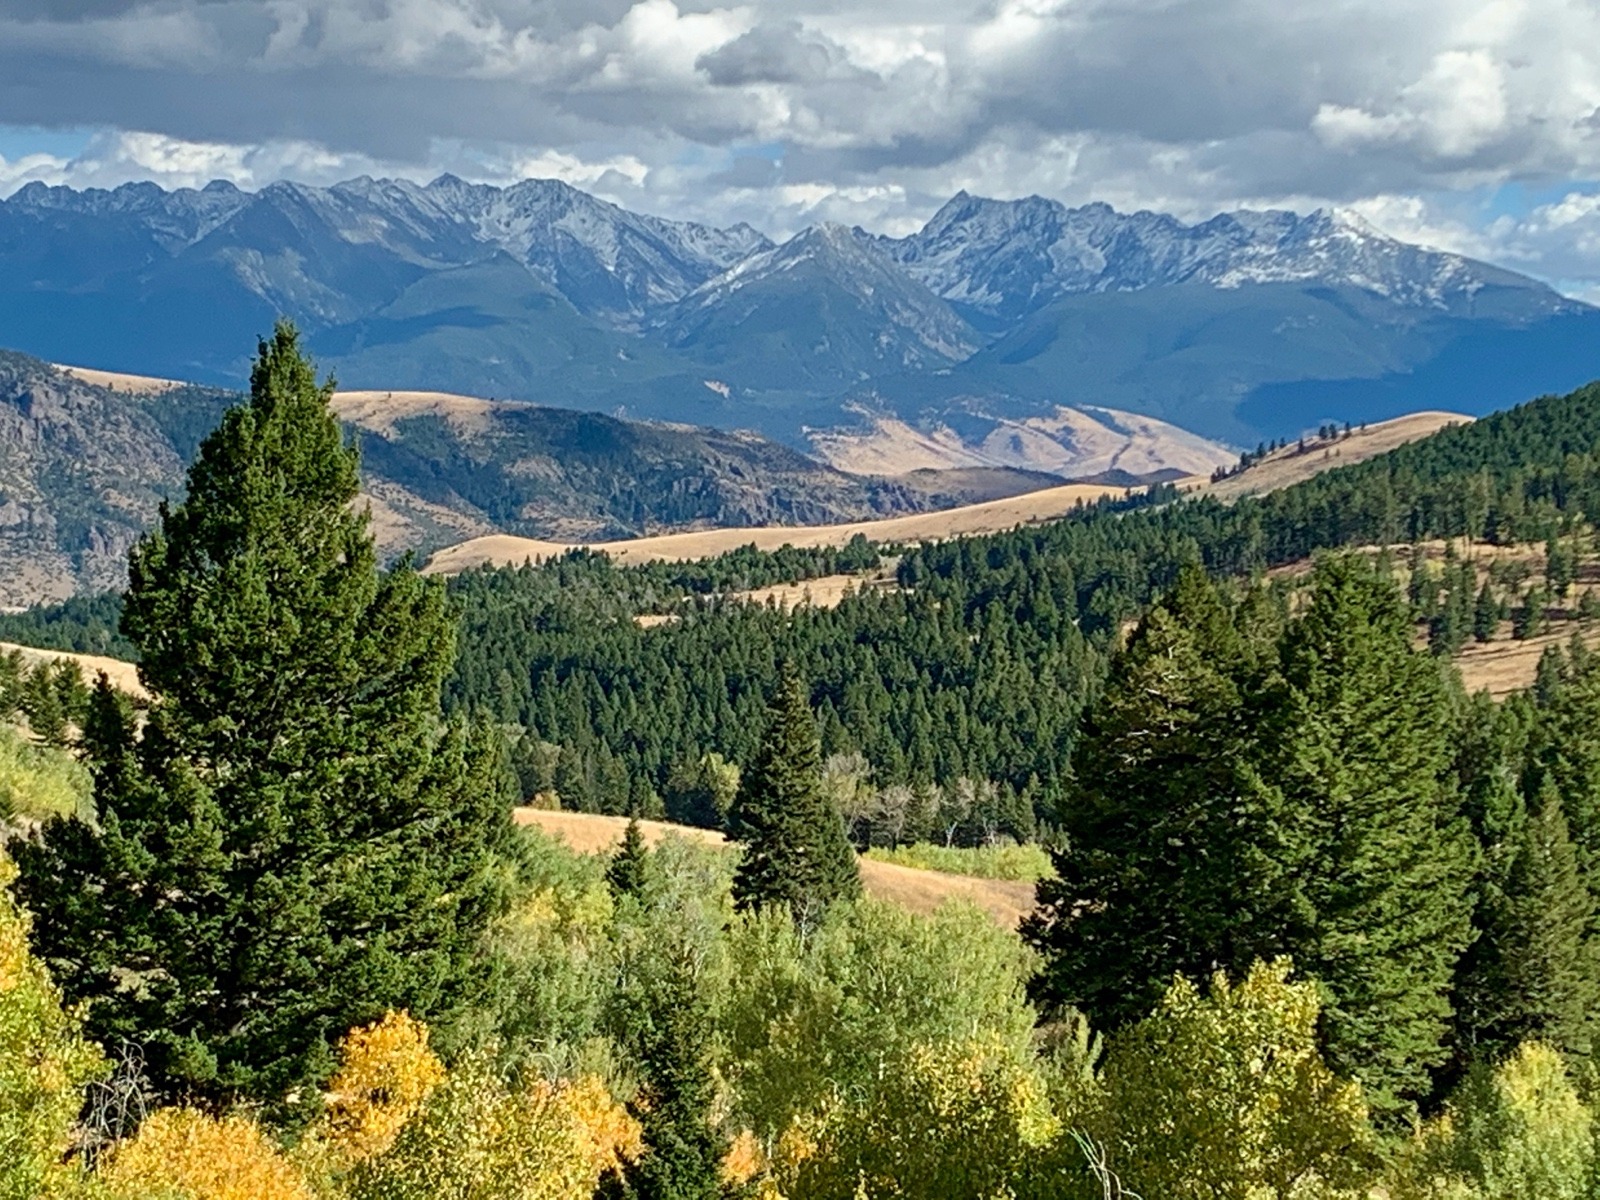 These are the kind of dramatic views that unfold from Mountain Sky Guest Ranch in Paradise Valley, Montana